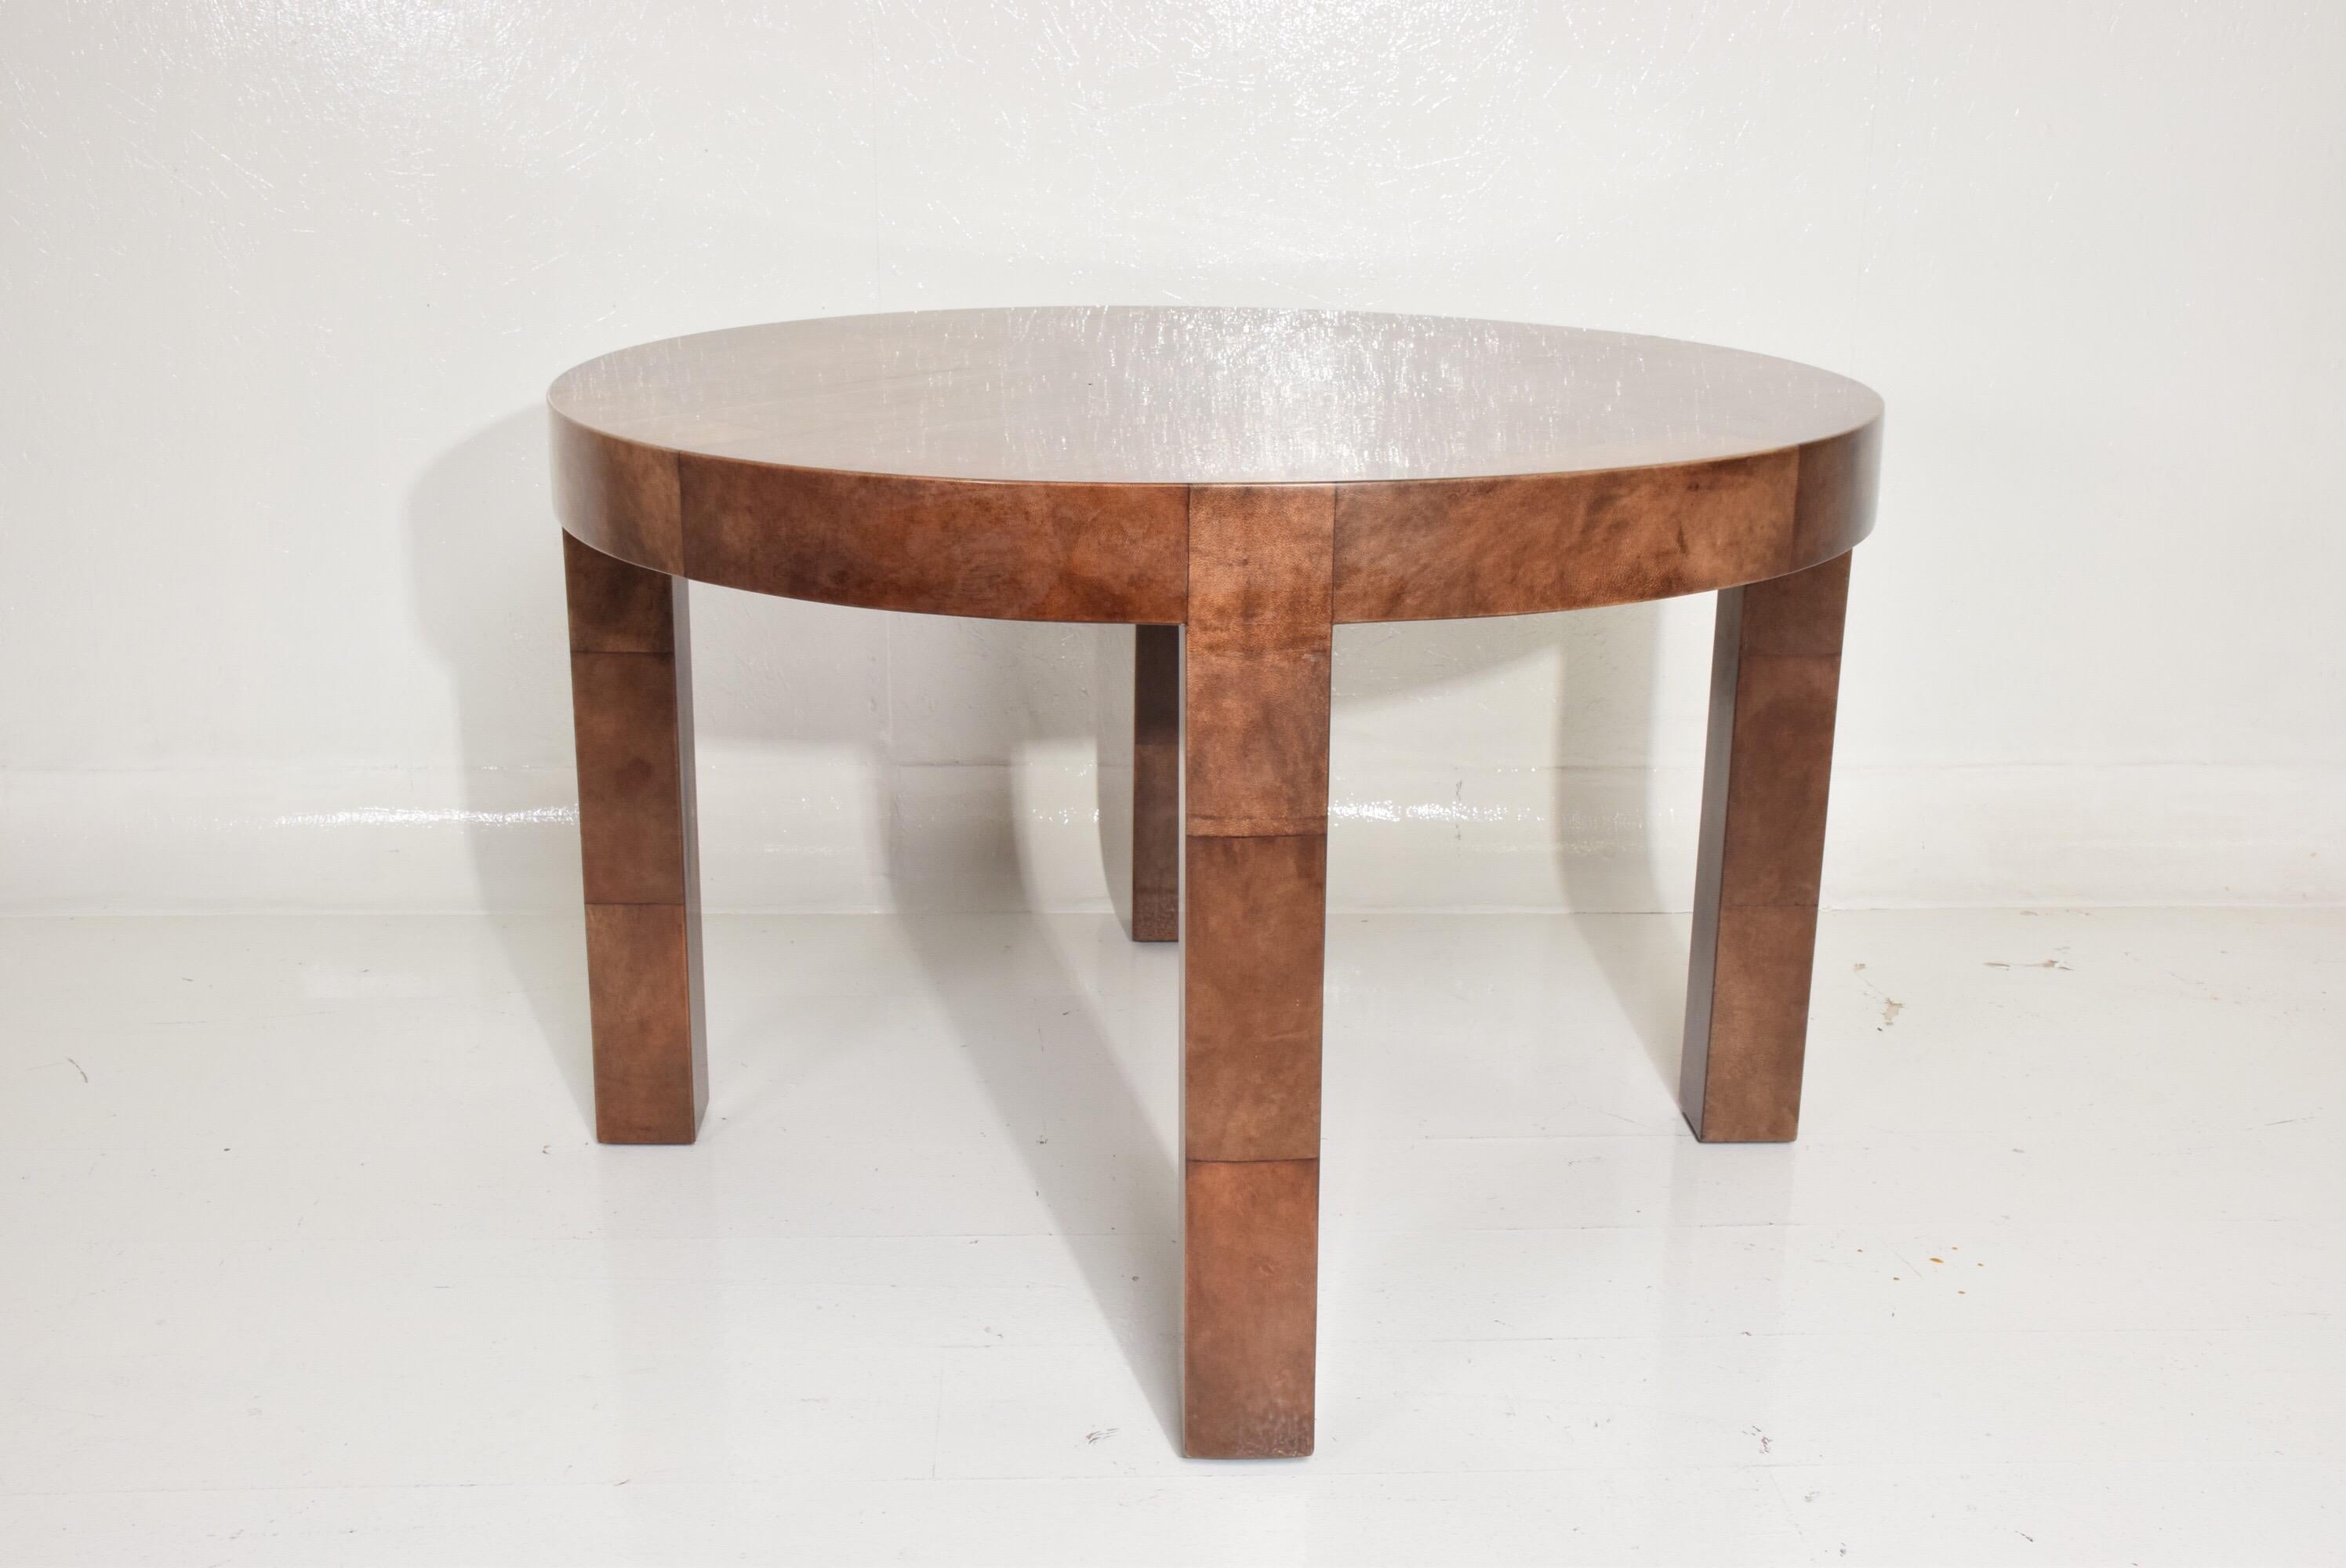 For your consideration, a Mid-Century Modern goatskin wrapped dining table in brown tones.
Unmarked, unsigned. 

Dimensions: 47 1/8